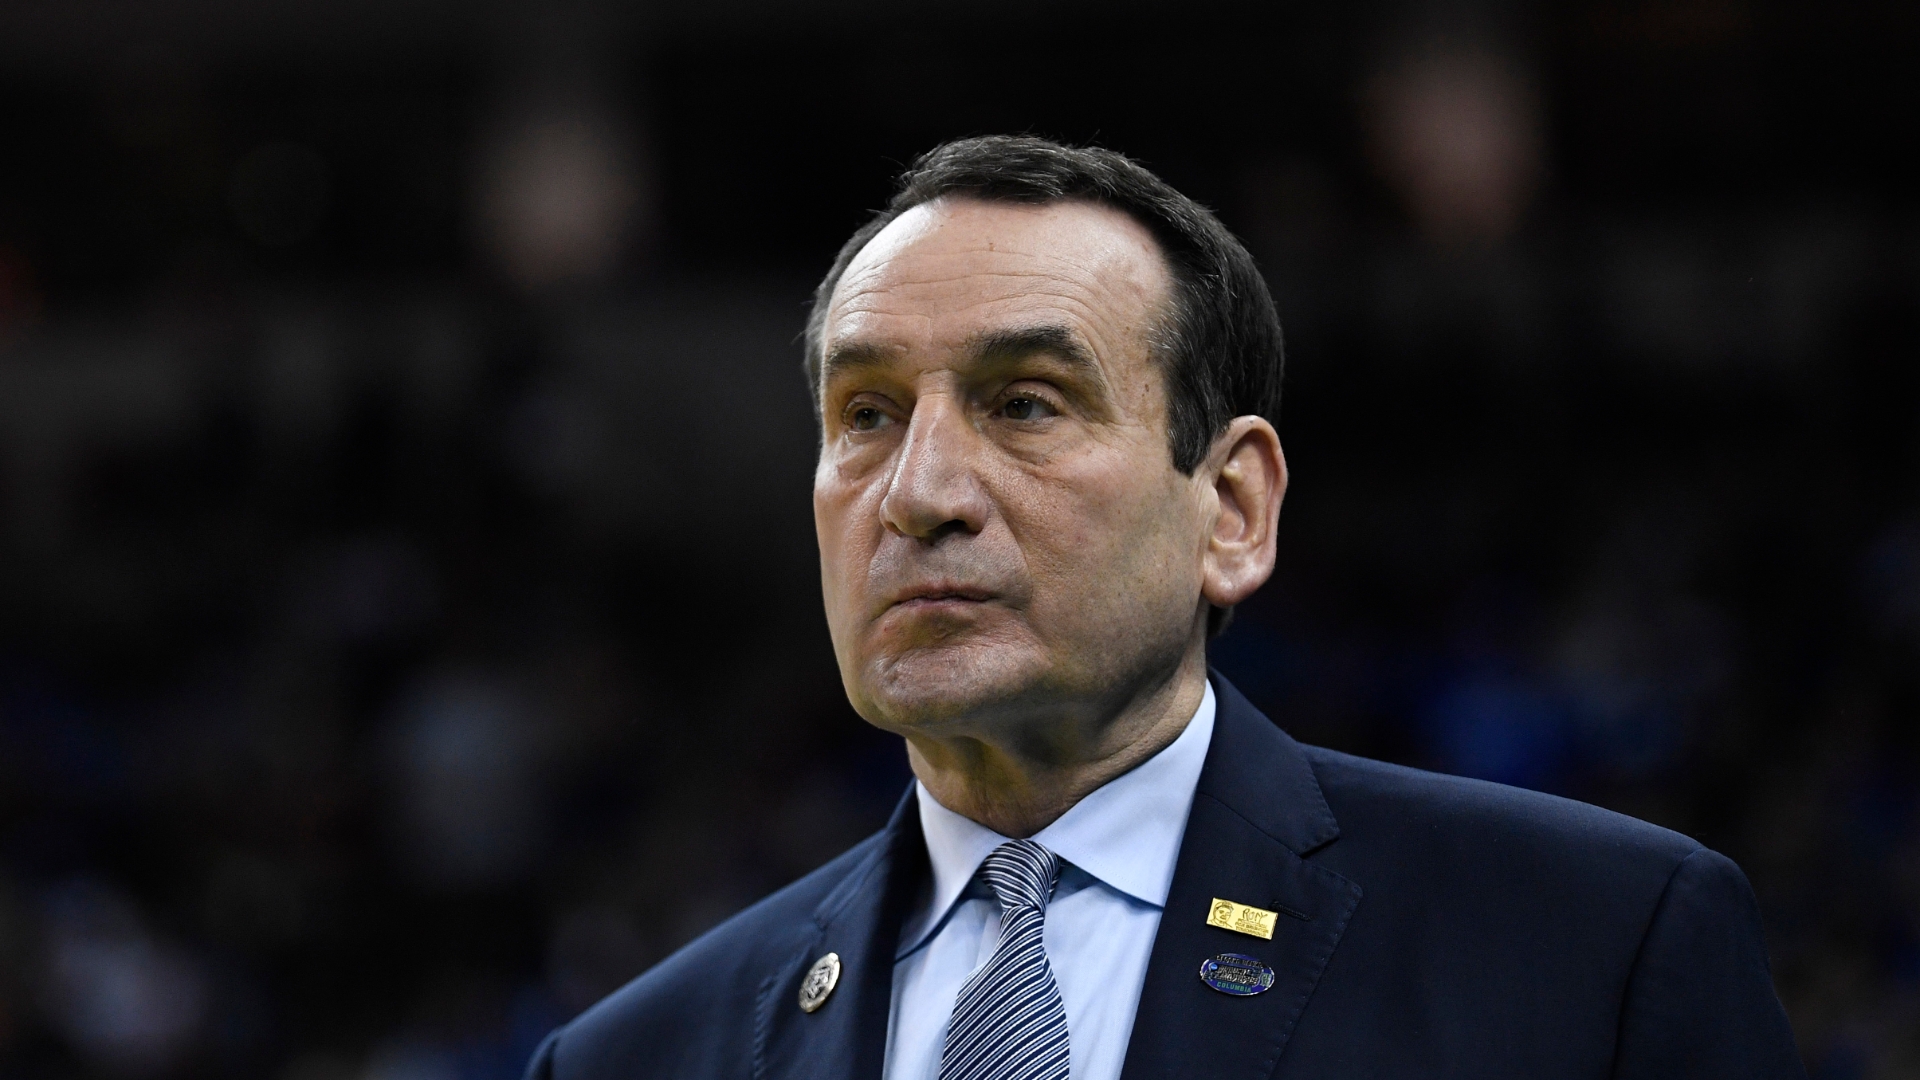 Coach K: 'We need to have the tournament'